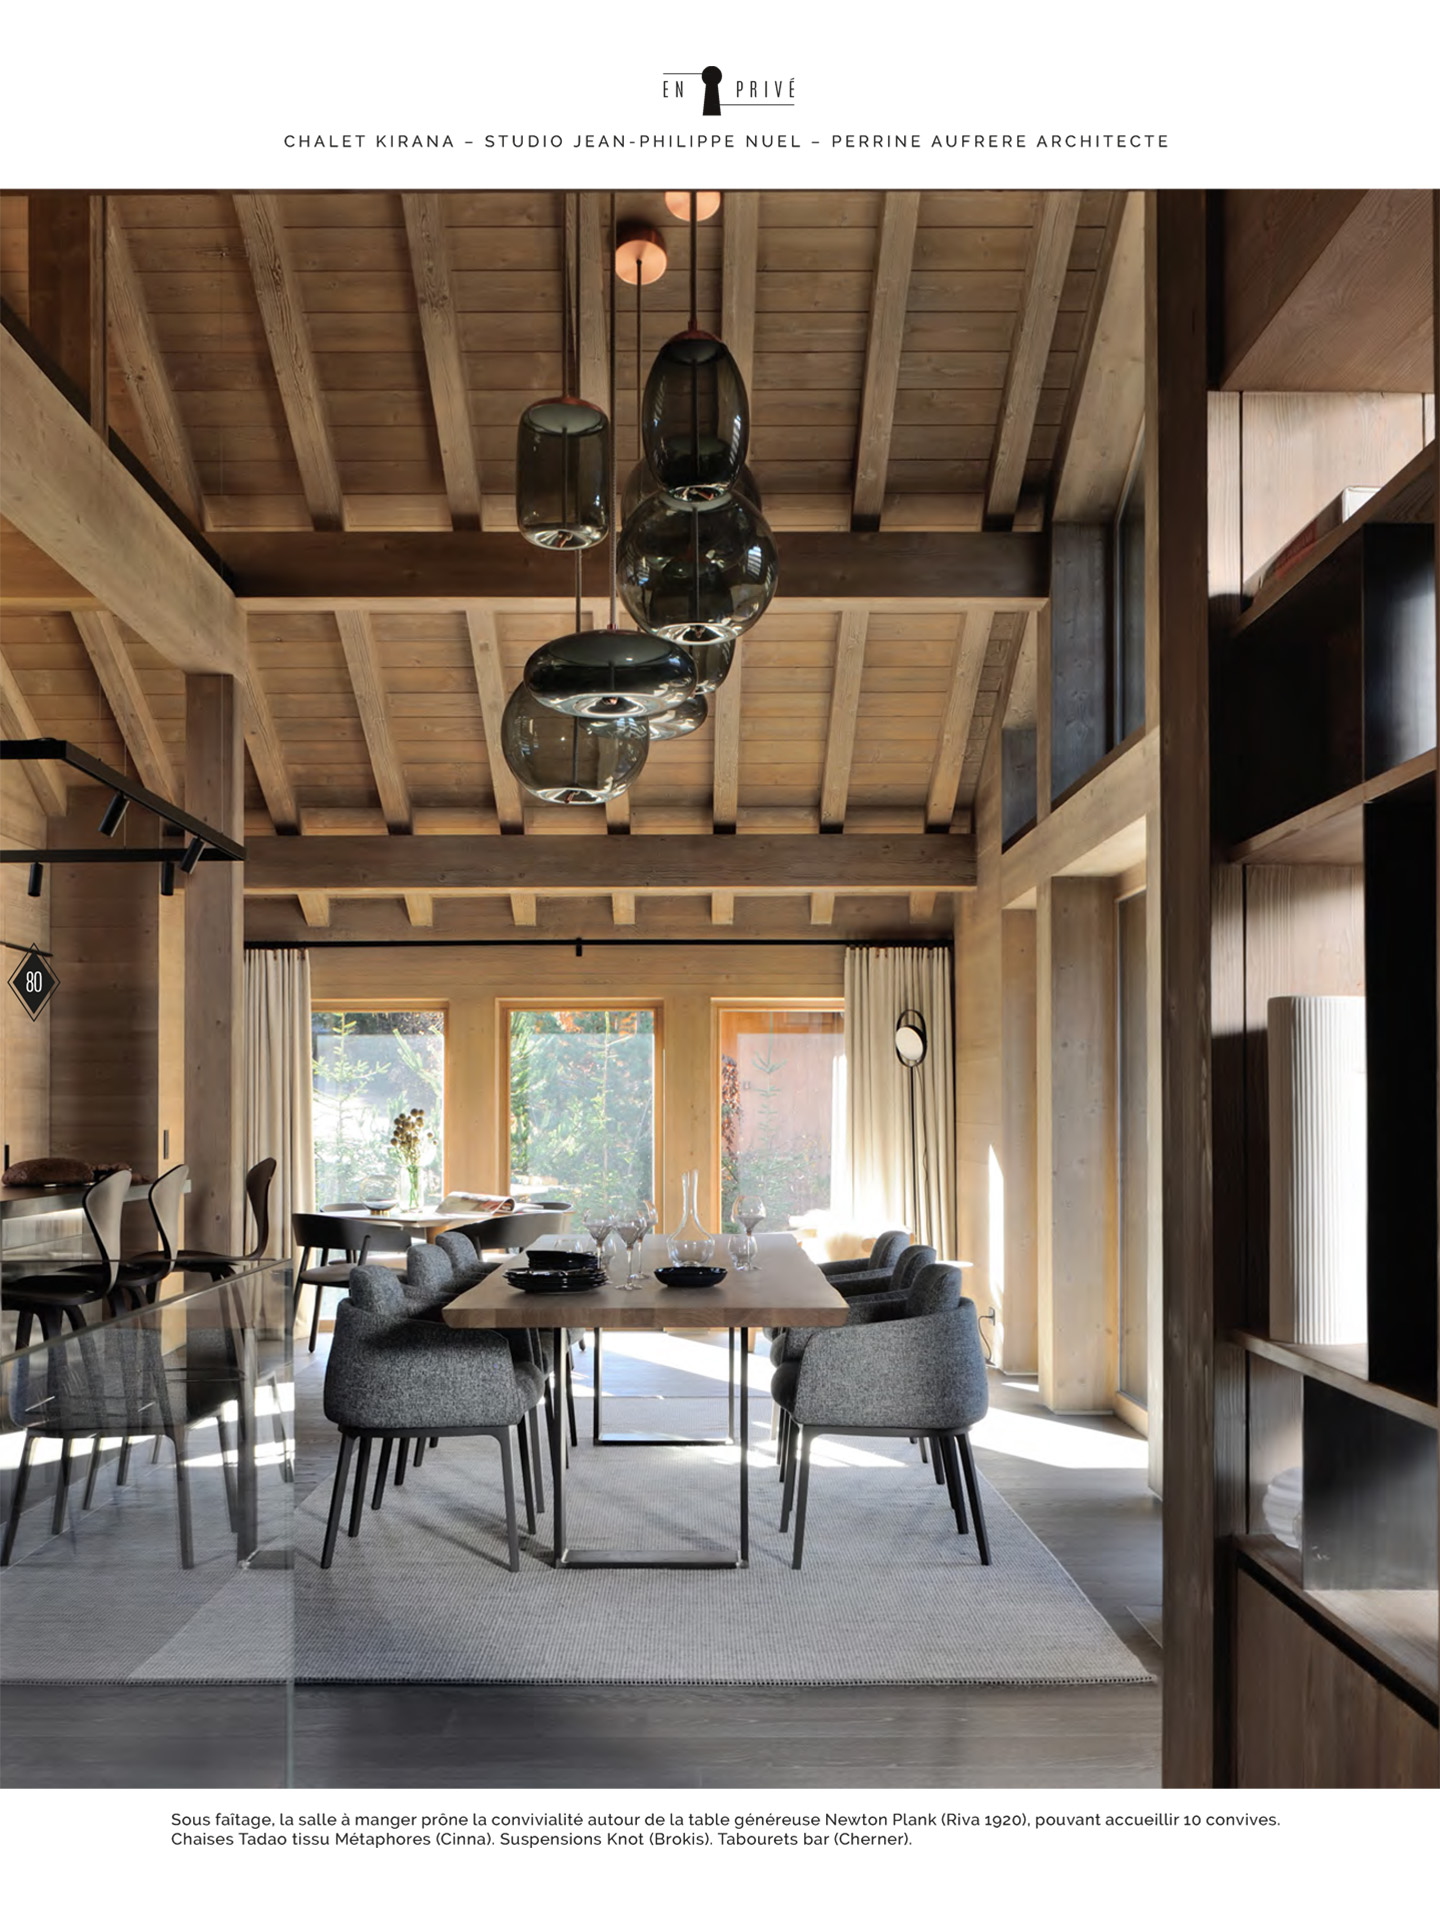 Article on the chalet kirana of meribel realized by the studio jean-philippe nuel in the magazine domodéco, luxury private chalet, interior design, interior decoration, luxury interior, designer